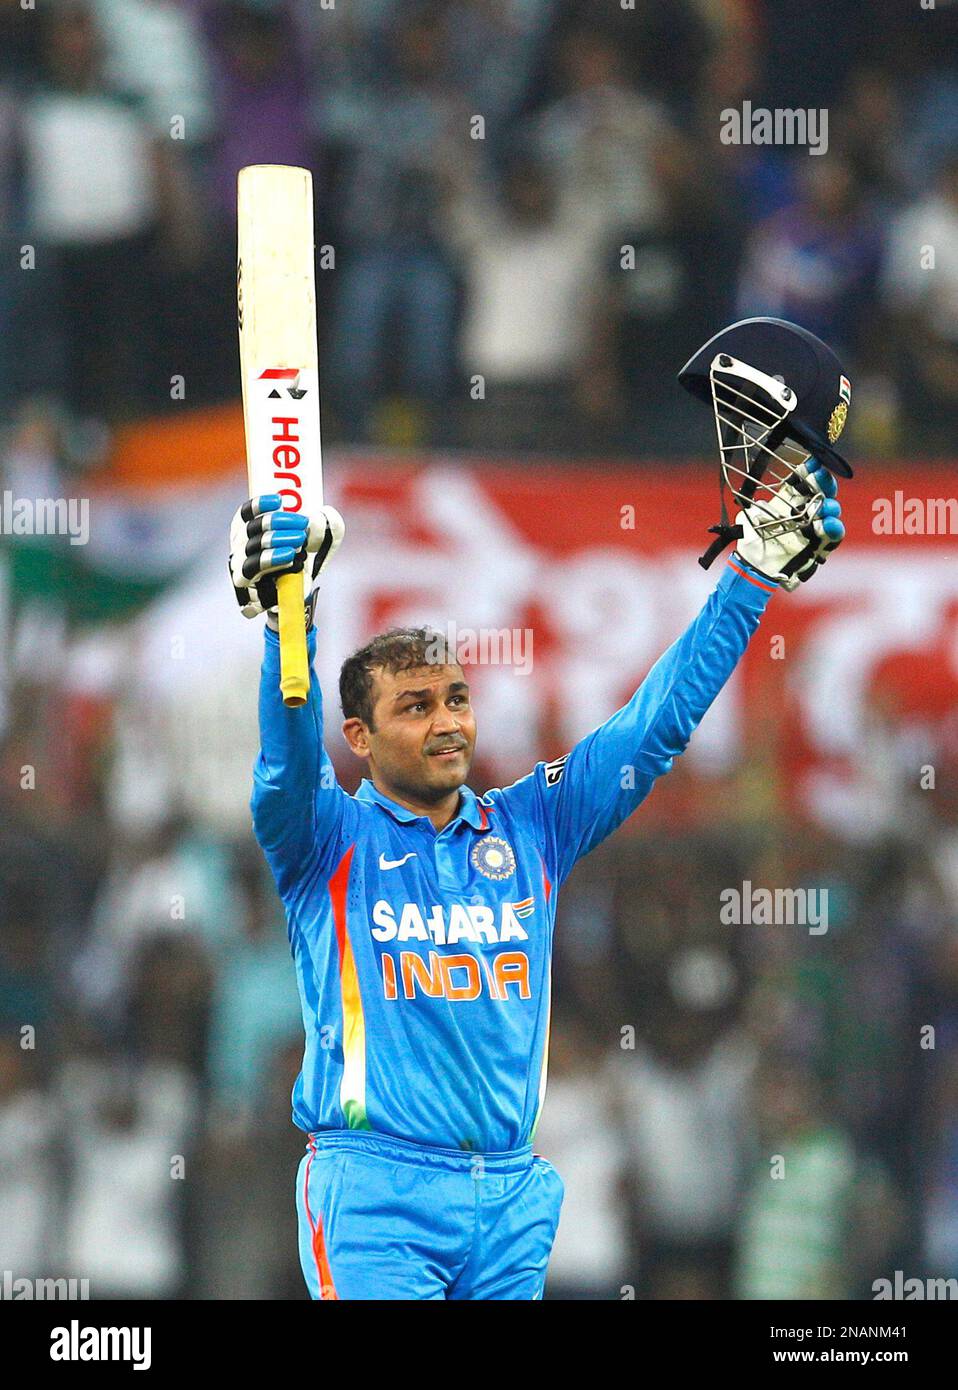 Indias captain Virender Sehwag celebrates scoring double century and his world record one-day score during their fourth one day international cricket match against West Indies in Indore, India, Thursday, Dec